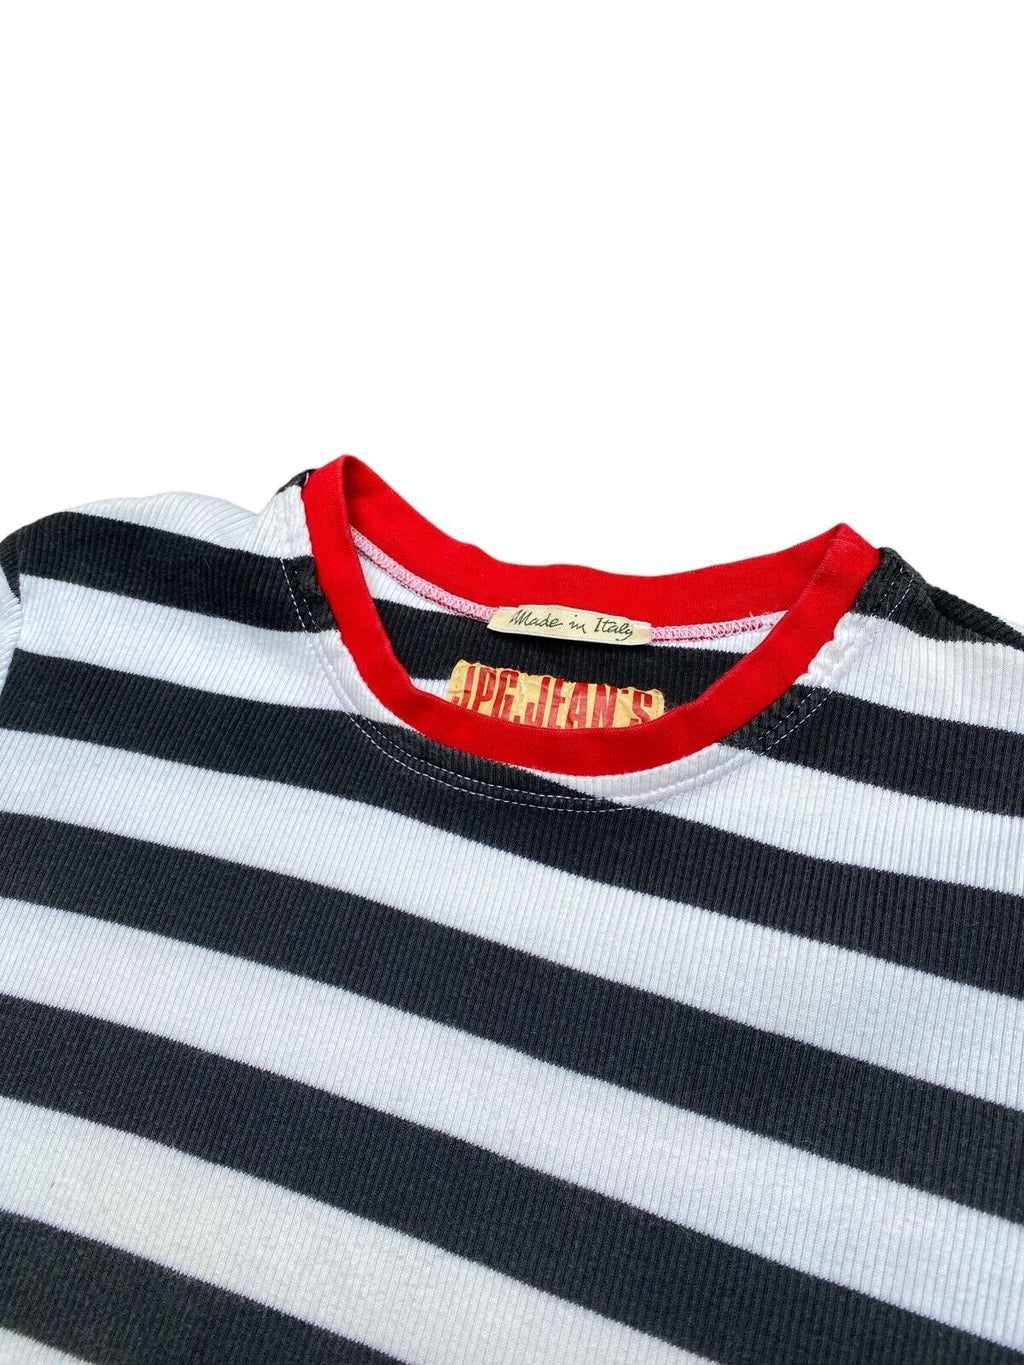 Jean Paul Gaultier  Vintage Striped T-shirt  Size S / Small